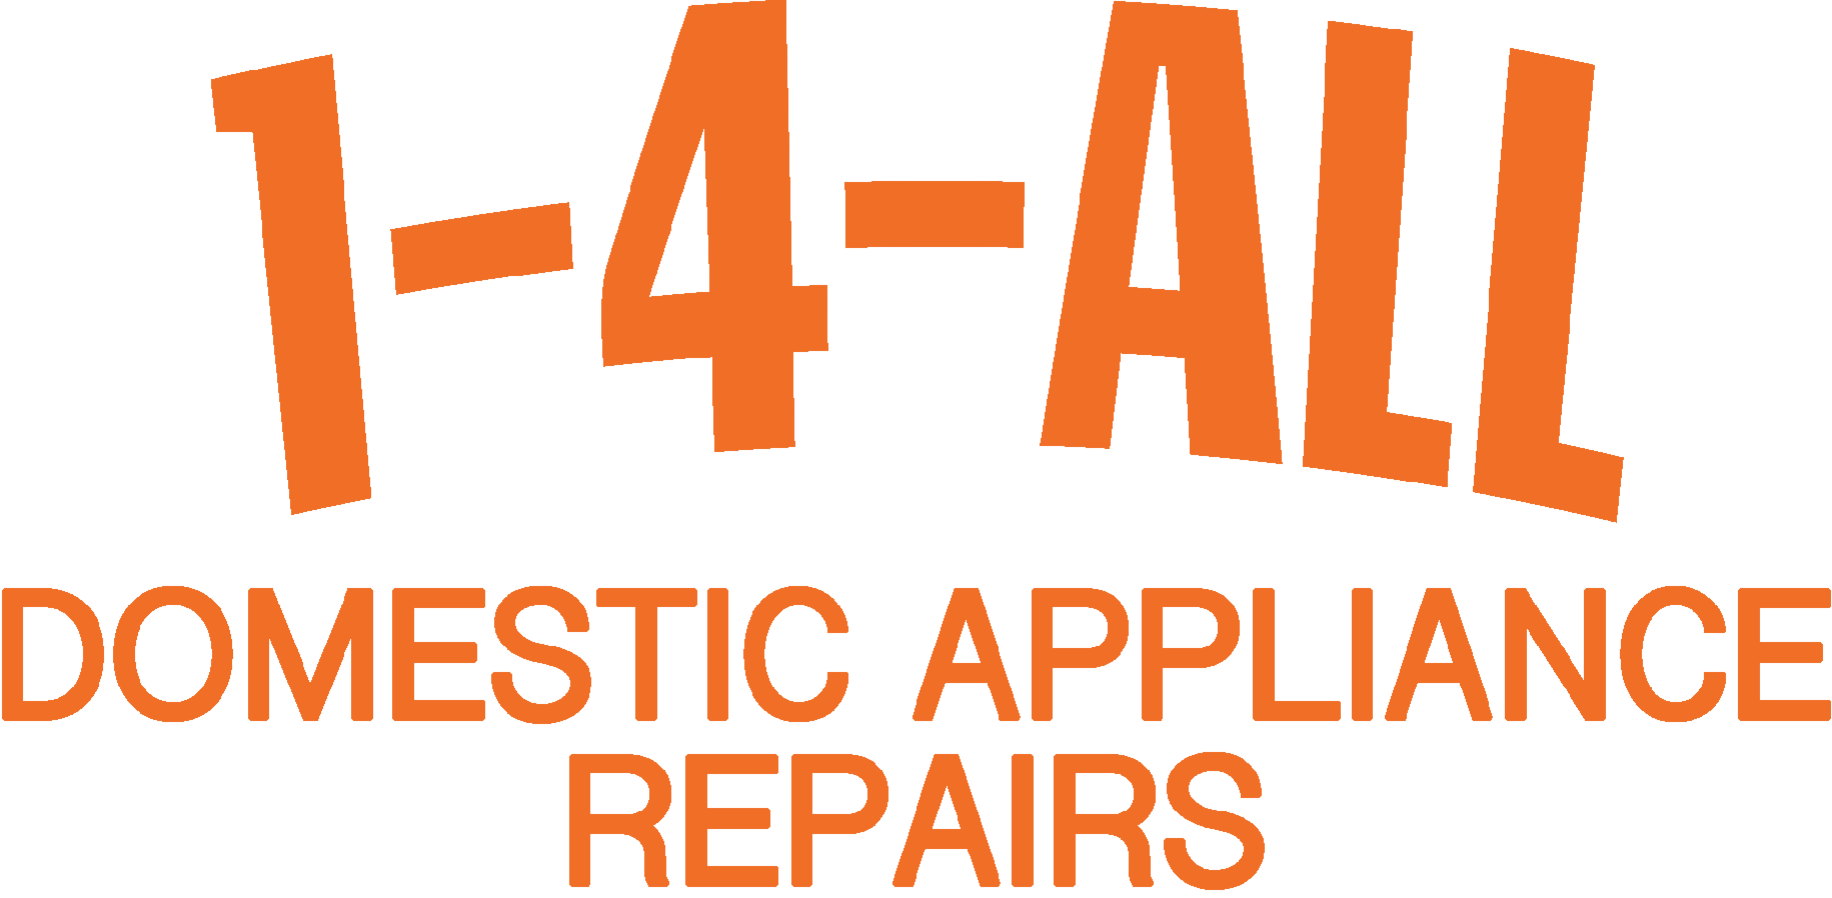 1-4-All - Home of domestic appliance repairs in Leicestershire